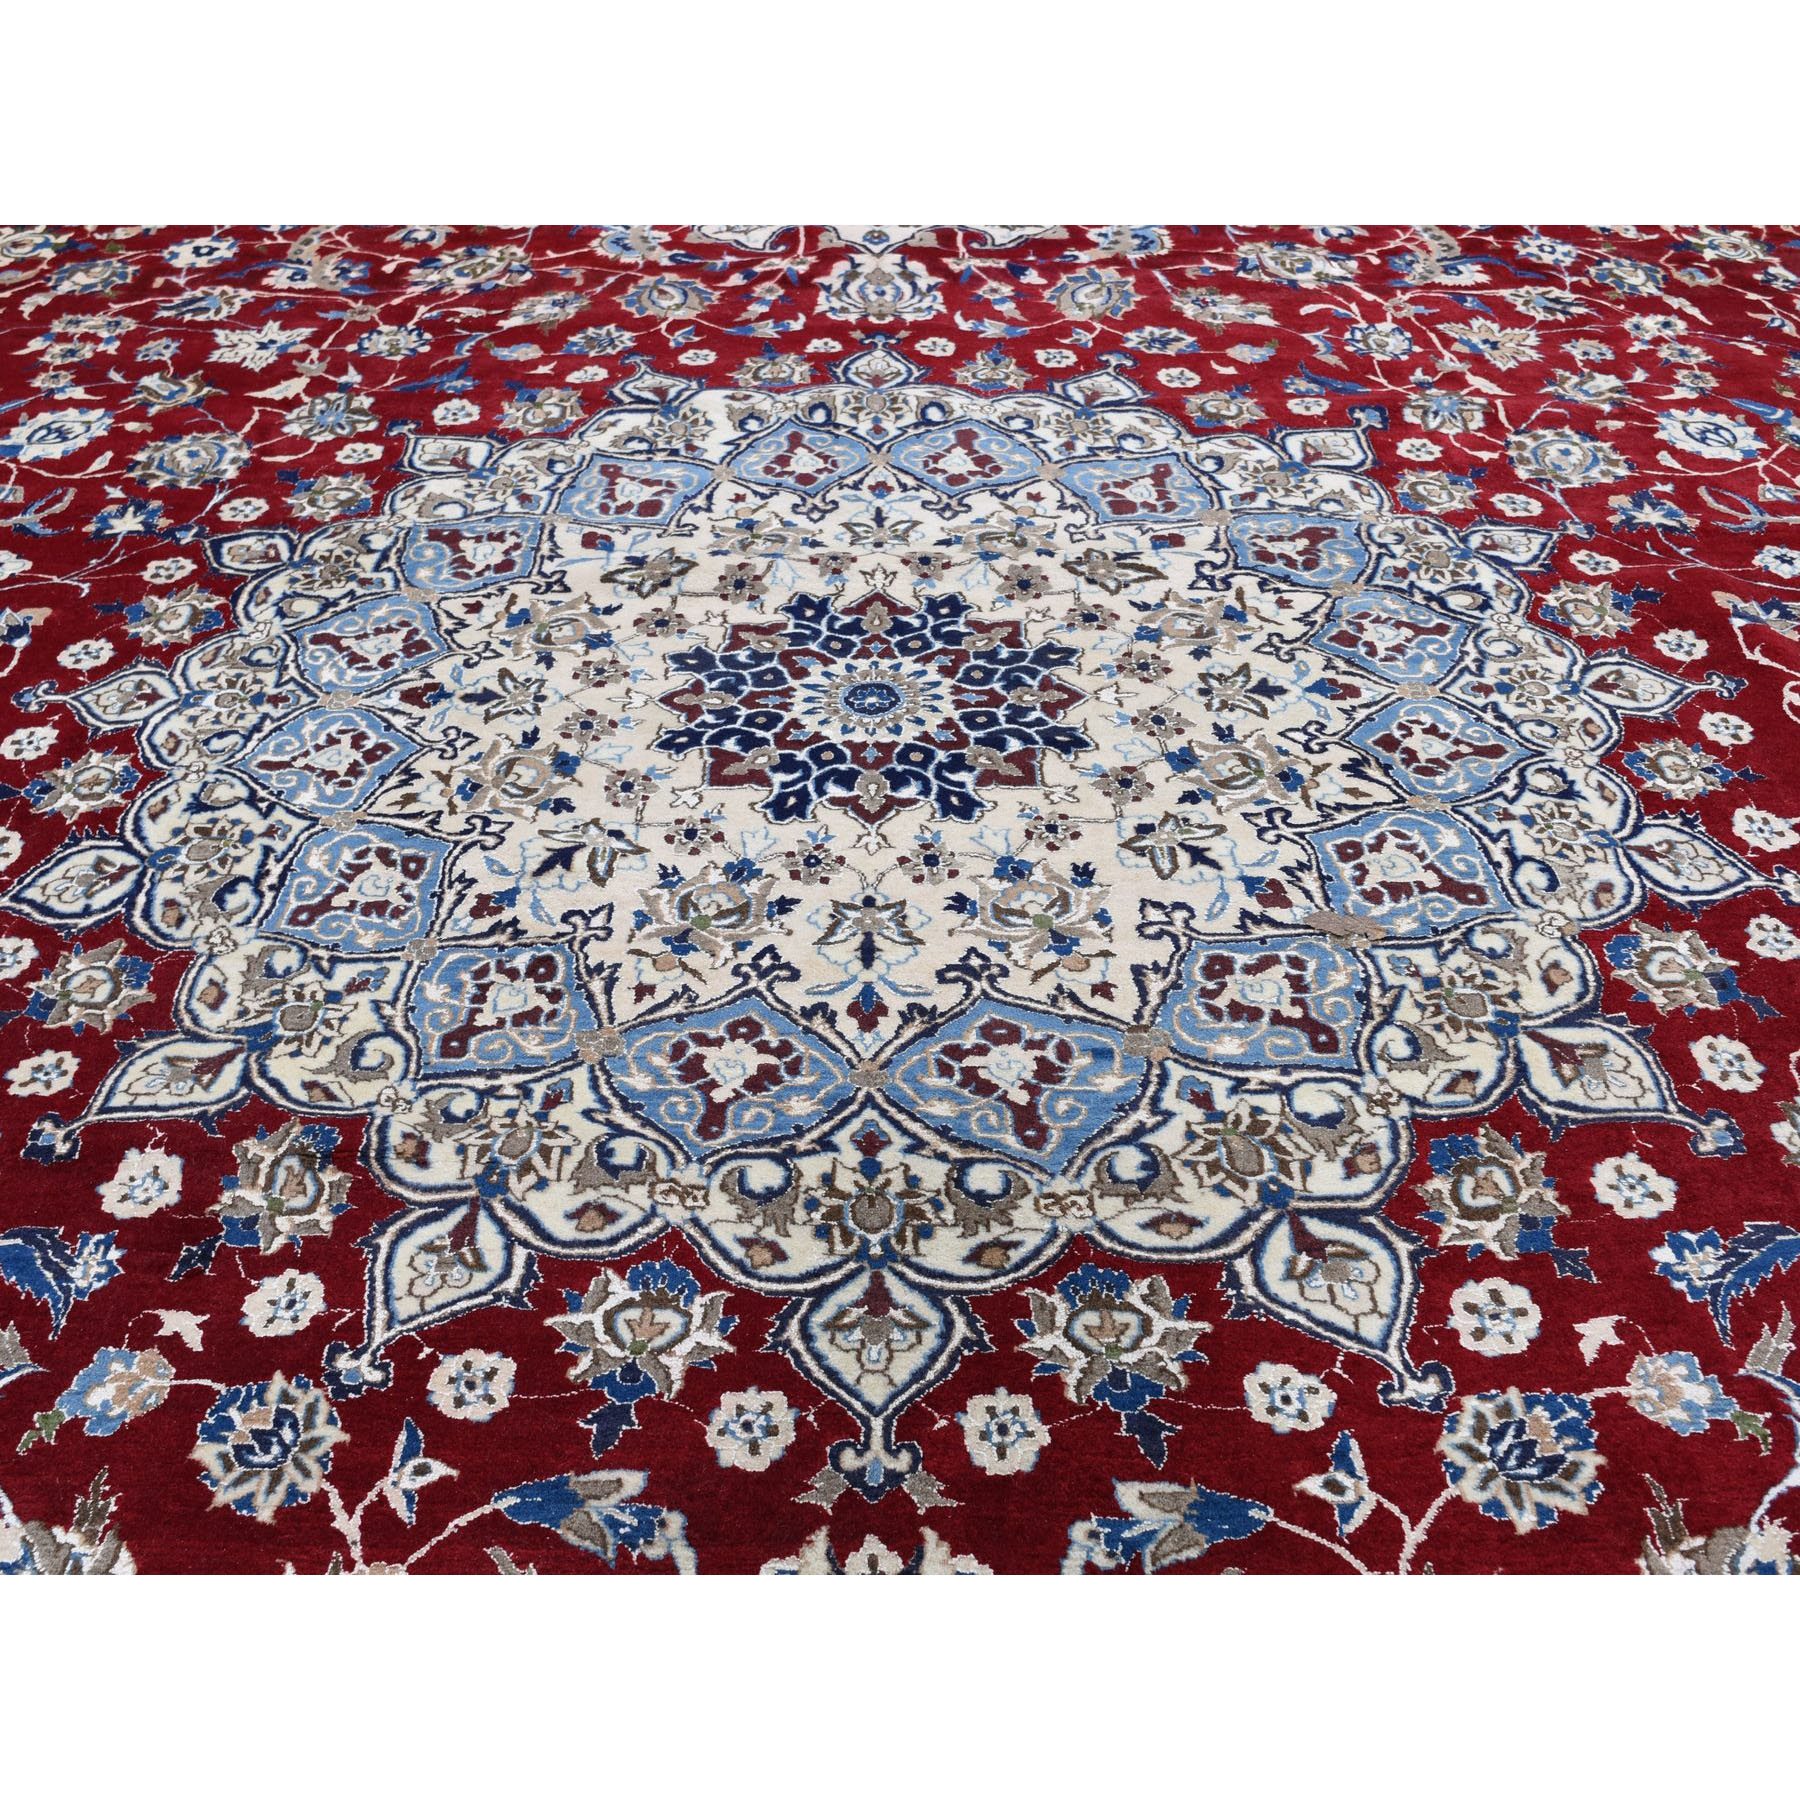 16-2 x26-6- Mansion Size Wool And Silk 250 KPSI Persian Nain Hand Knotted Oriental Rug 